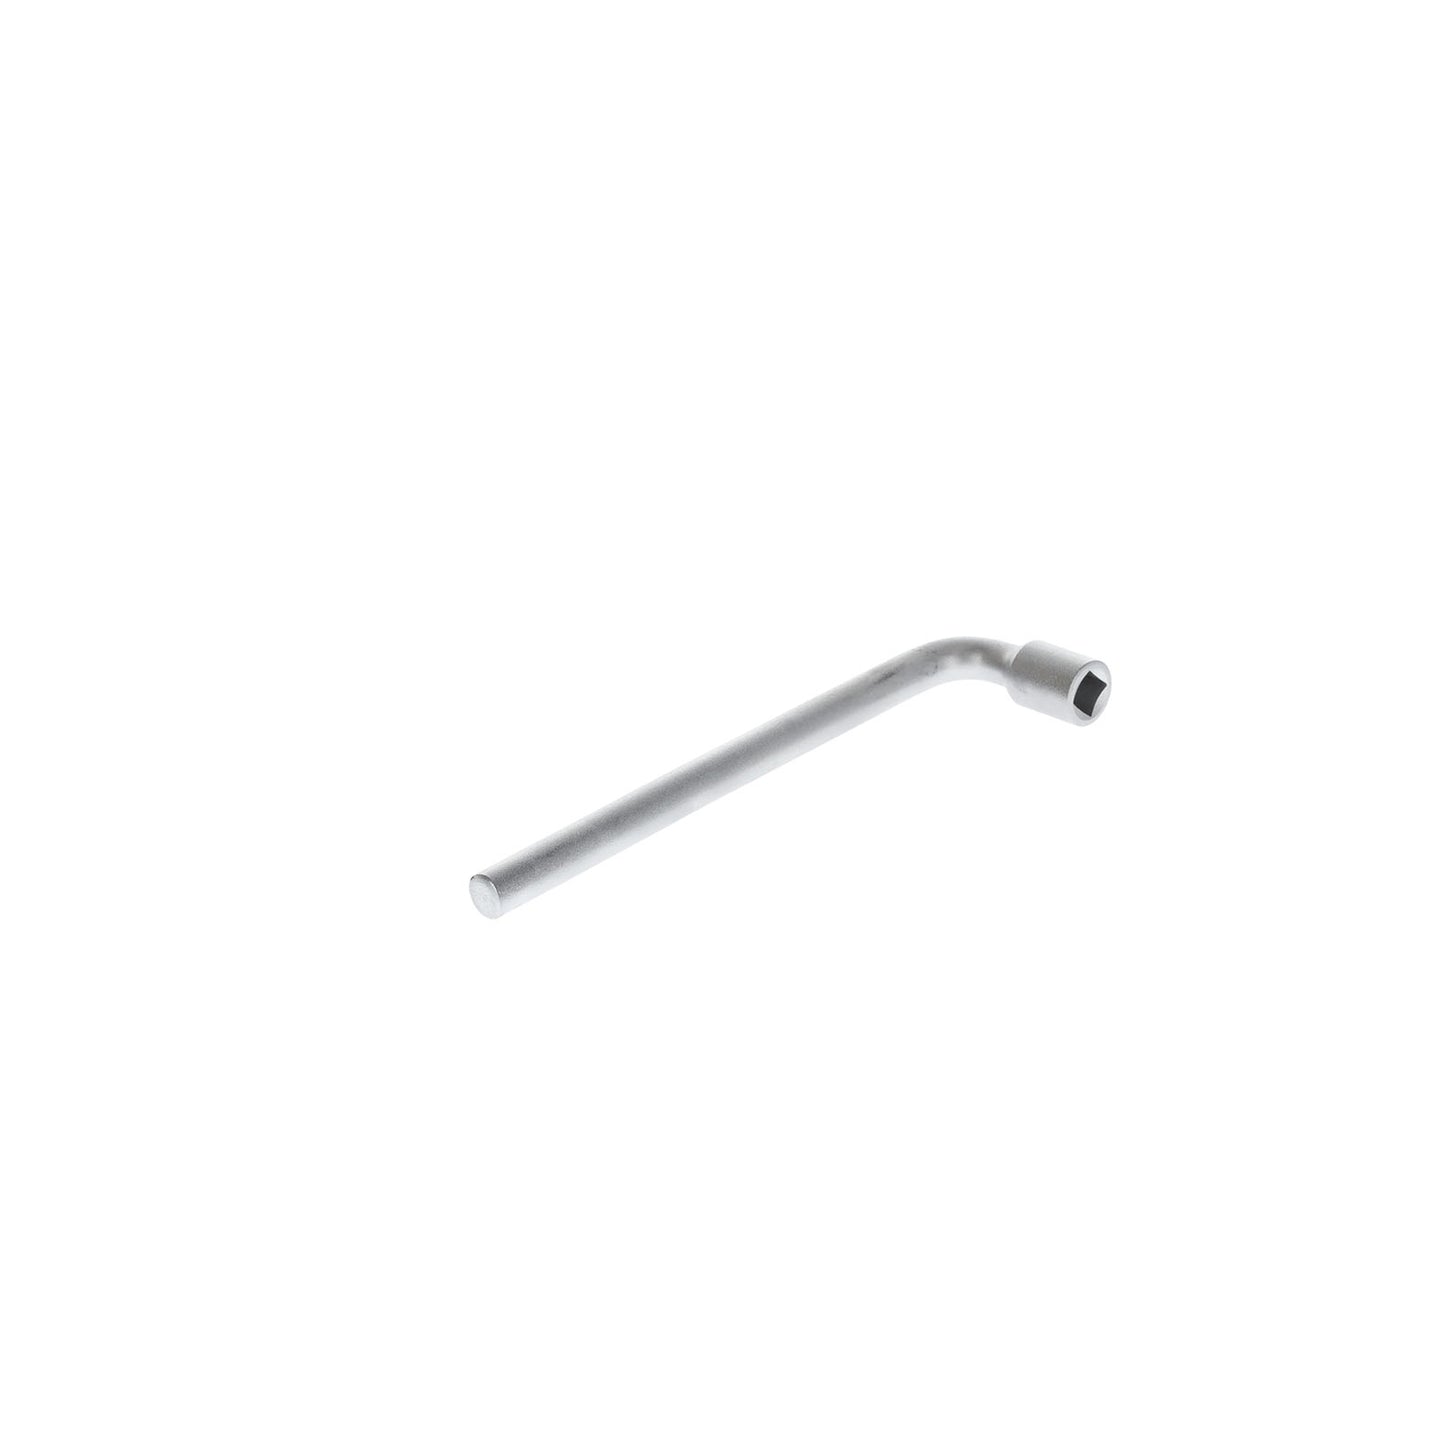 GEDORE 25 V 8 - Square Profile Wrench, 8mm (6194770)